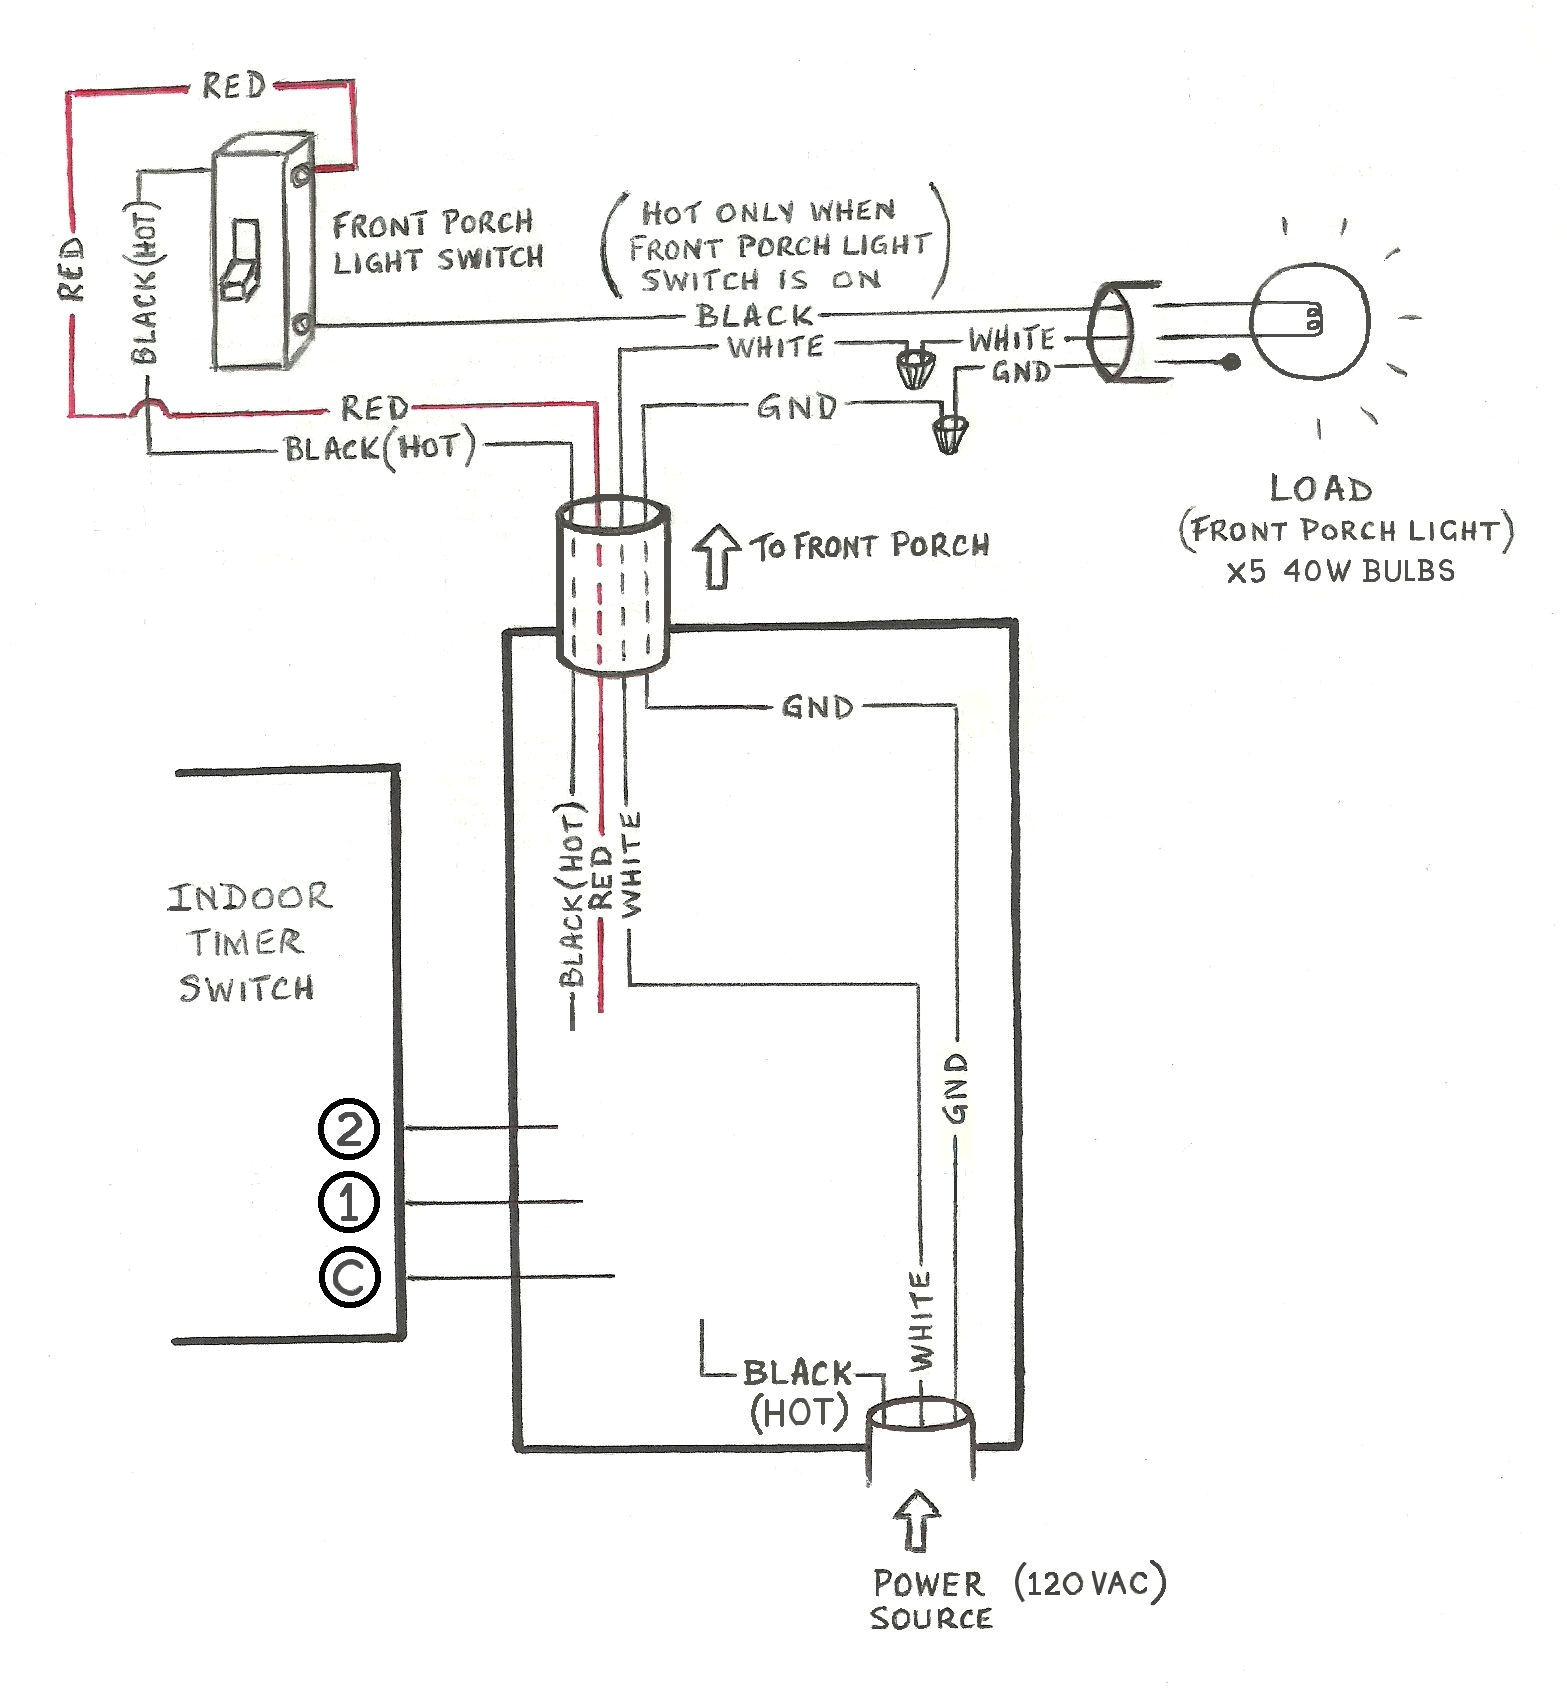 honeywell r8285a wiring diagram best of honeywell fan center wiring explained wiring diagrams